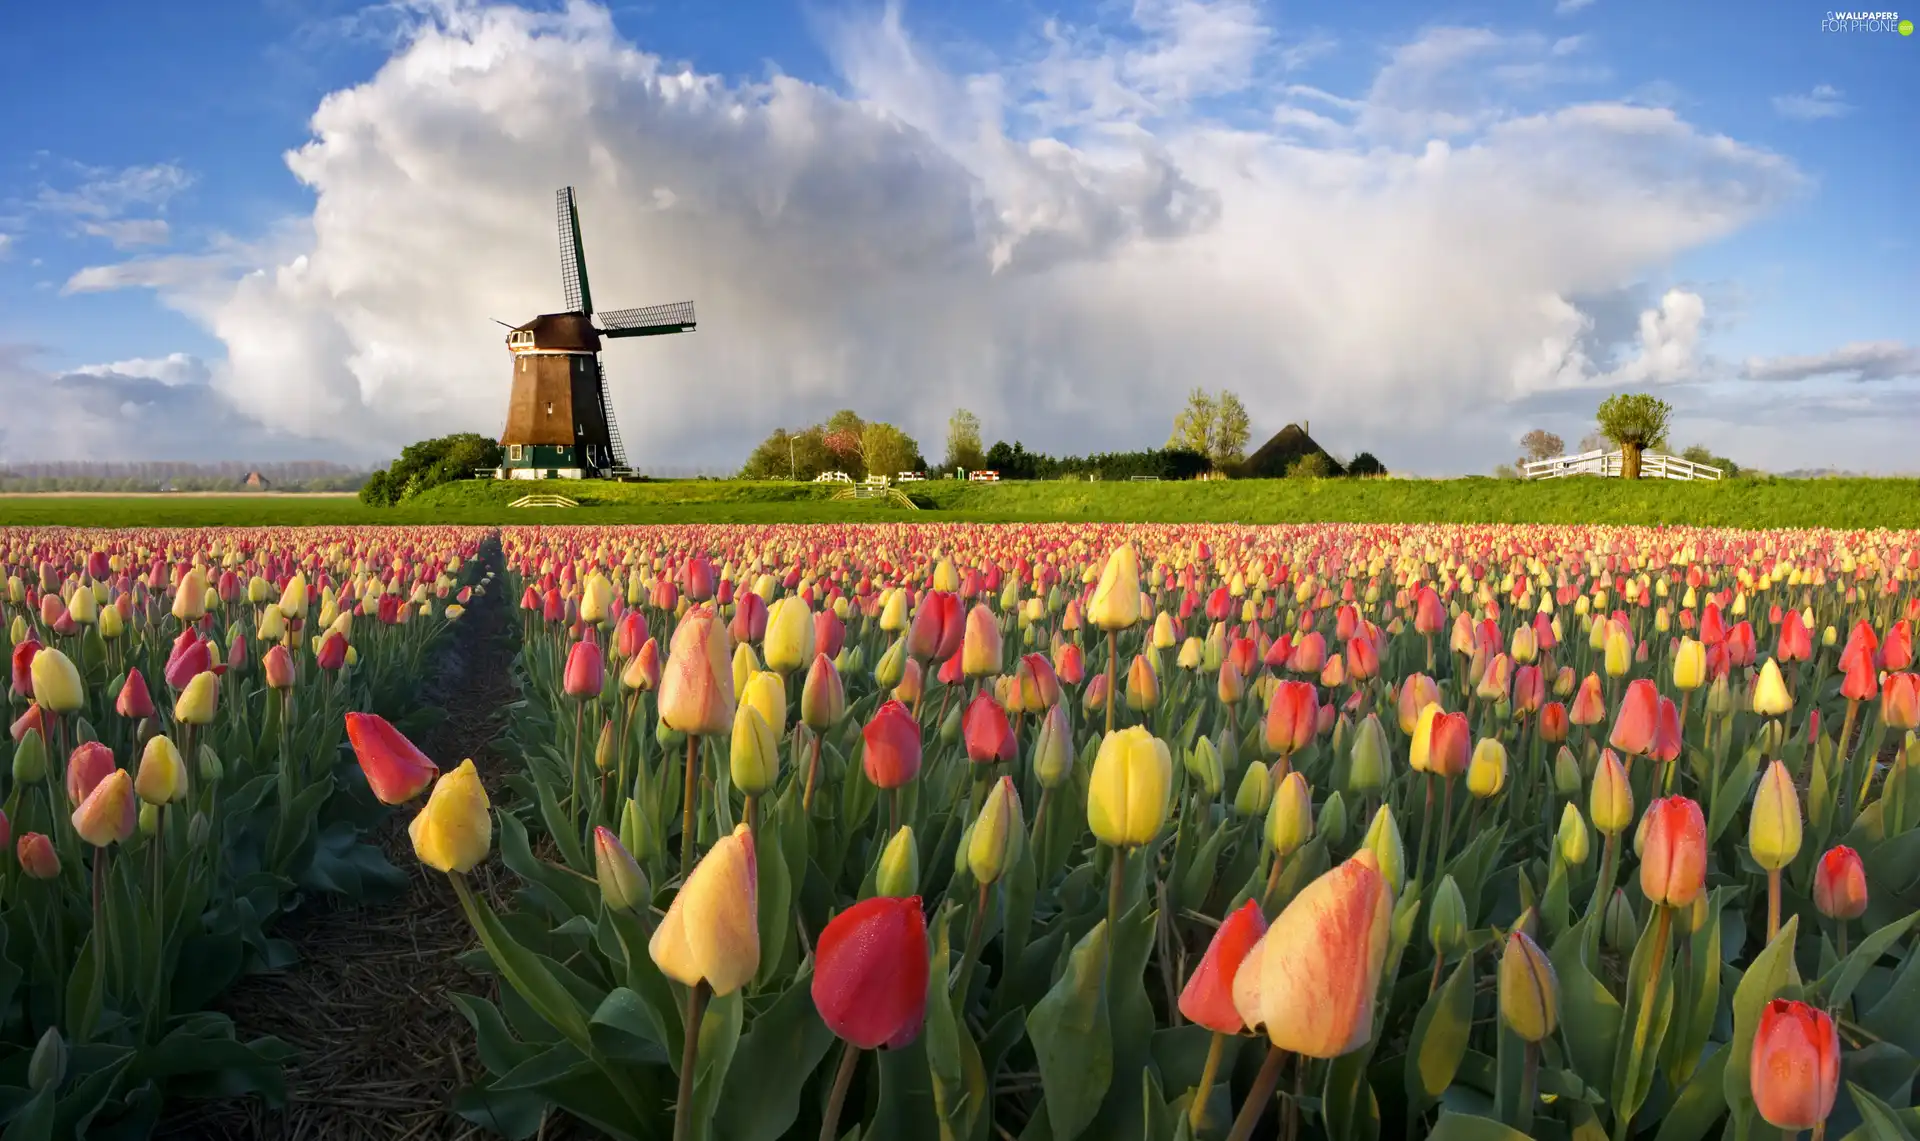 Tulips, Windmill, color